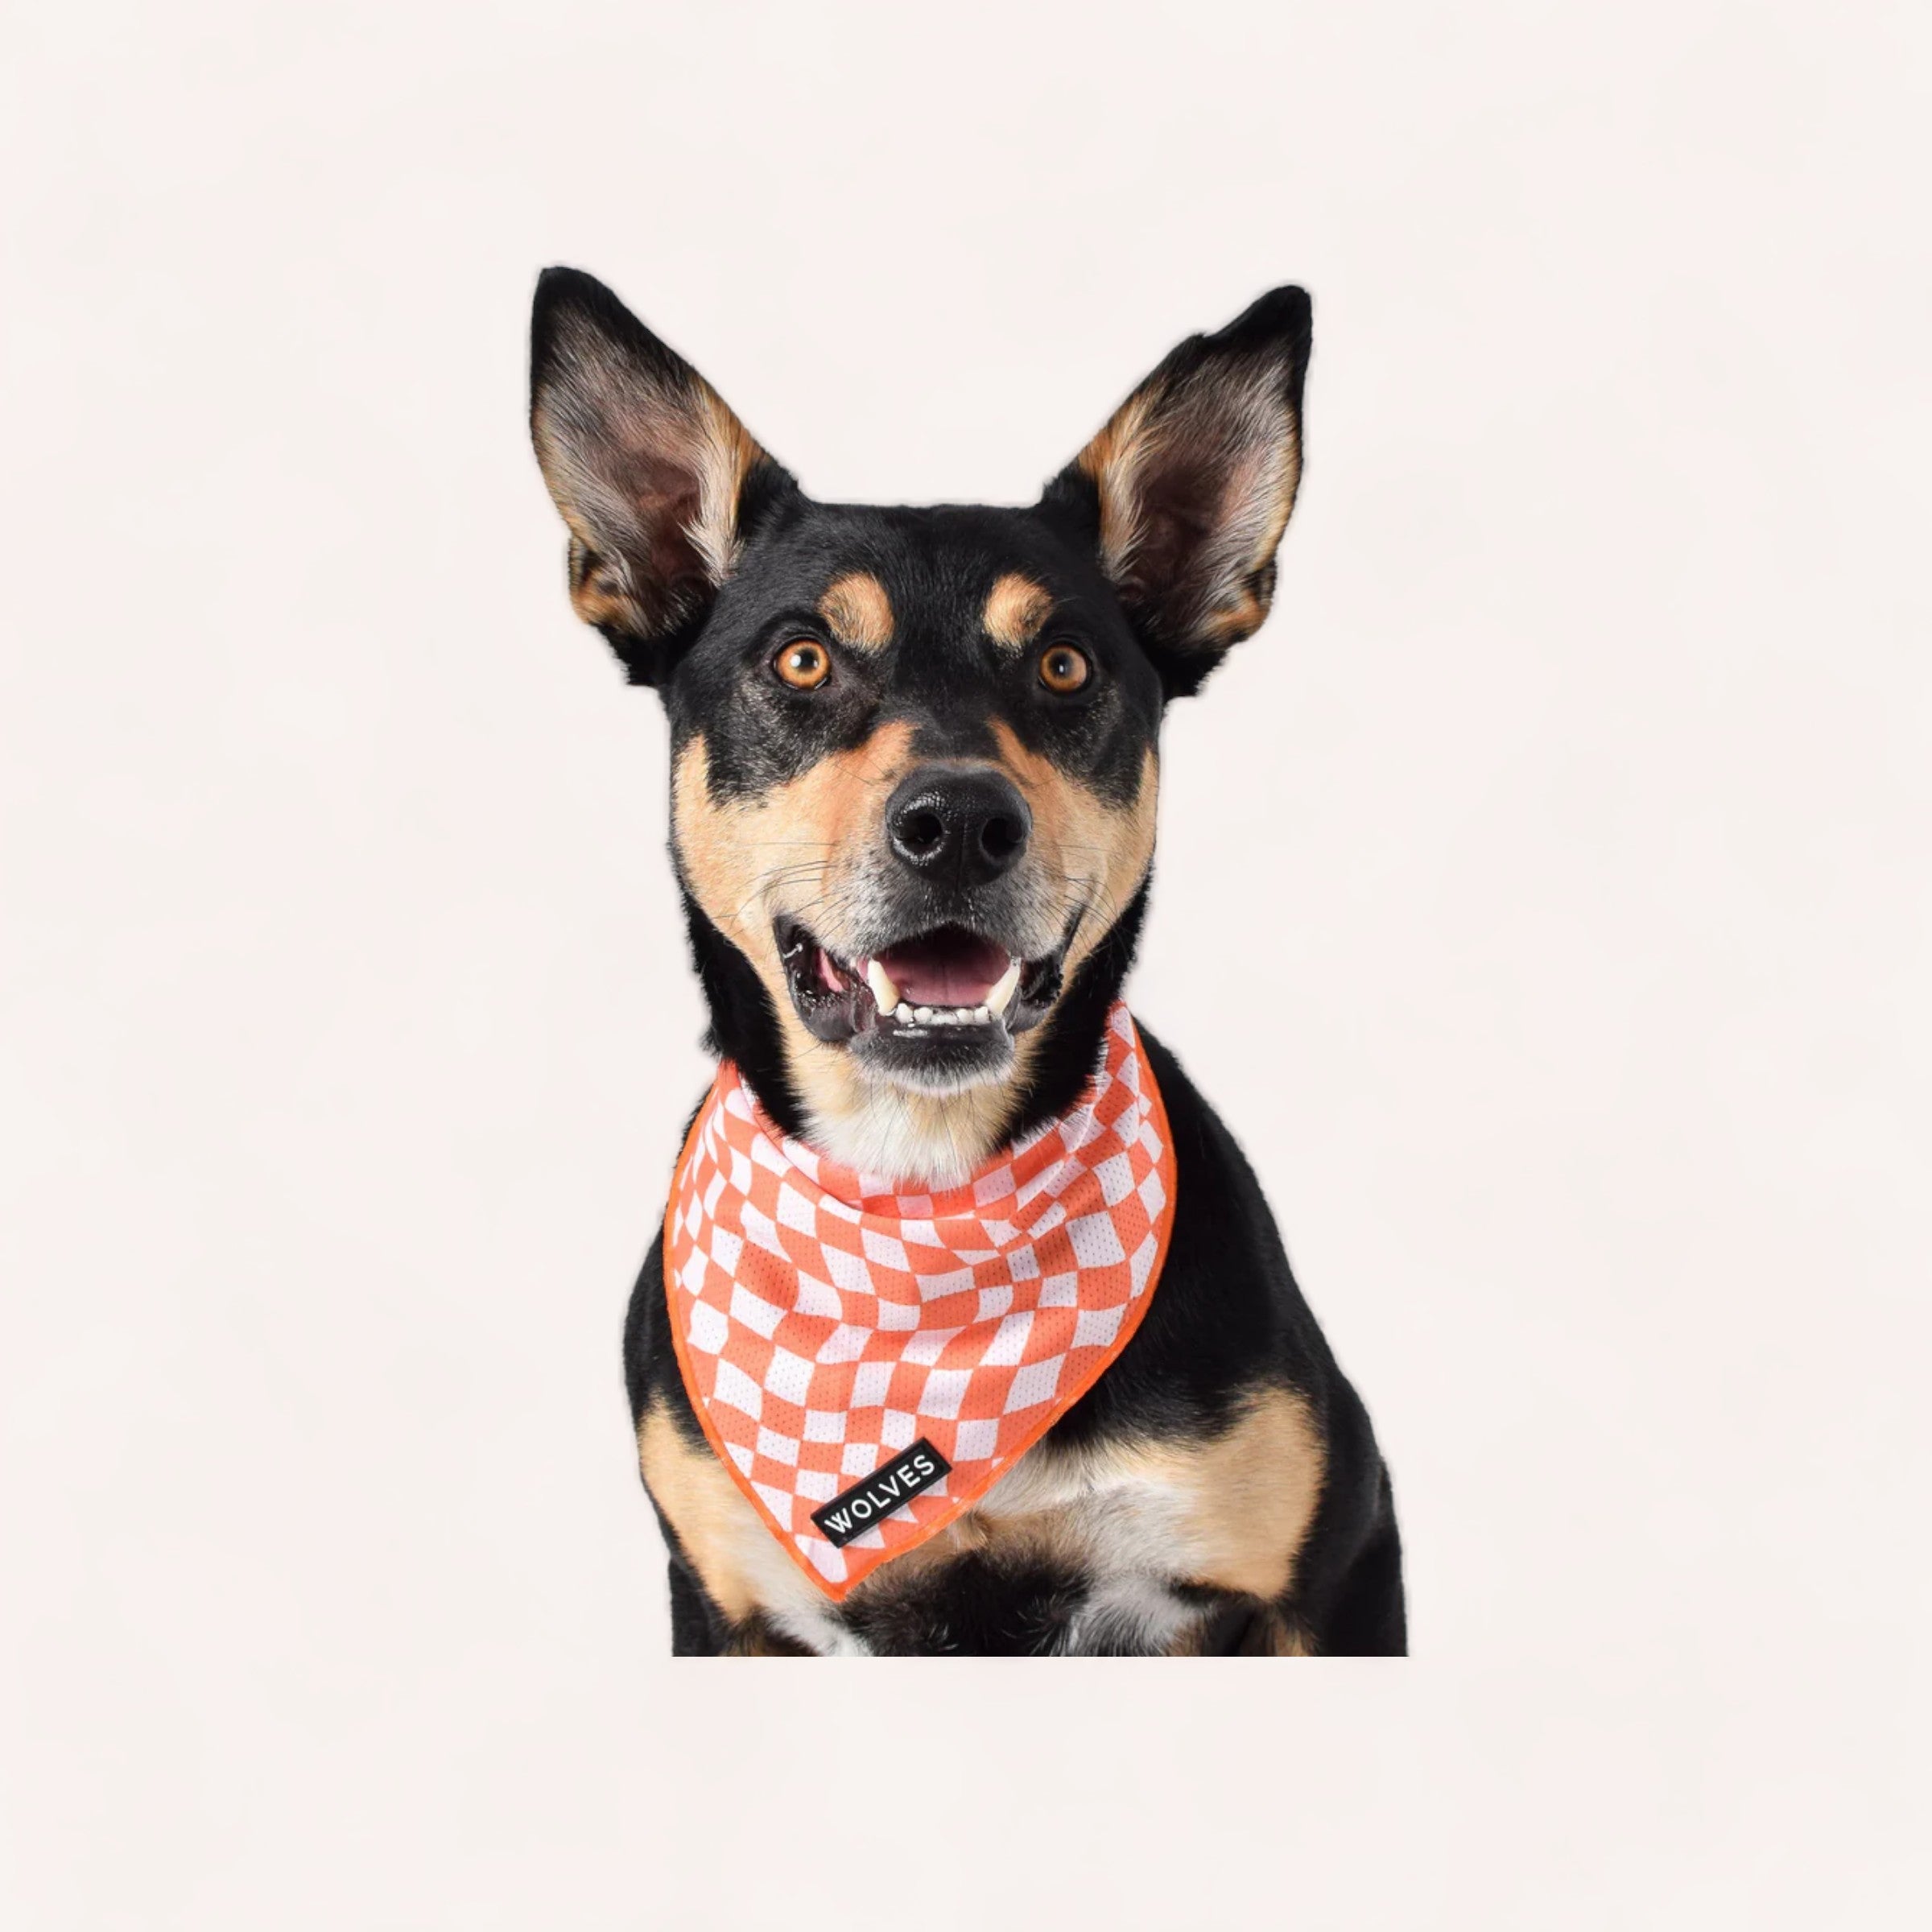 A joyful dog with perky ears and a Benji Bandana by Wolves of Wellington made from lightweight mesh material around its neck, looking directly at the camera with a happy expression.